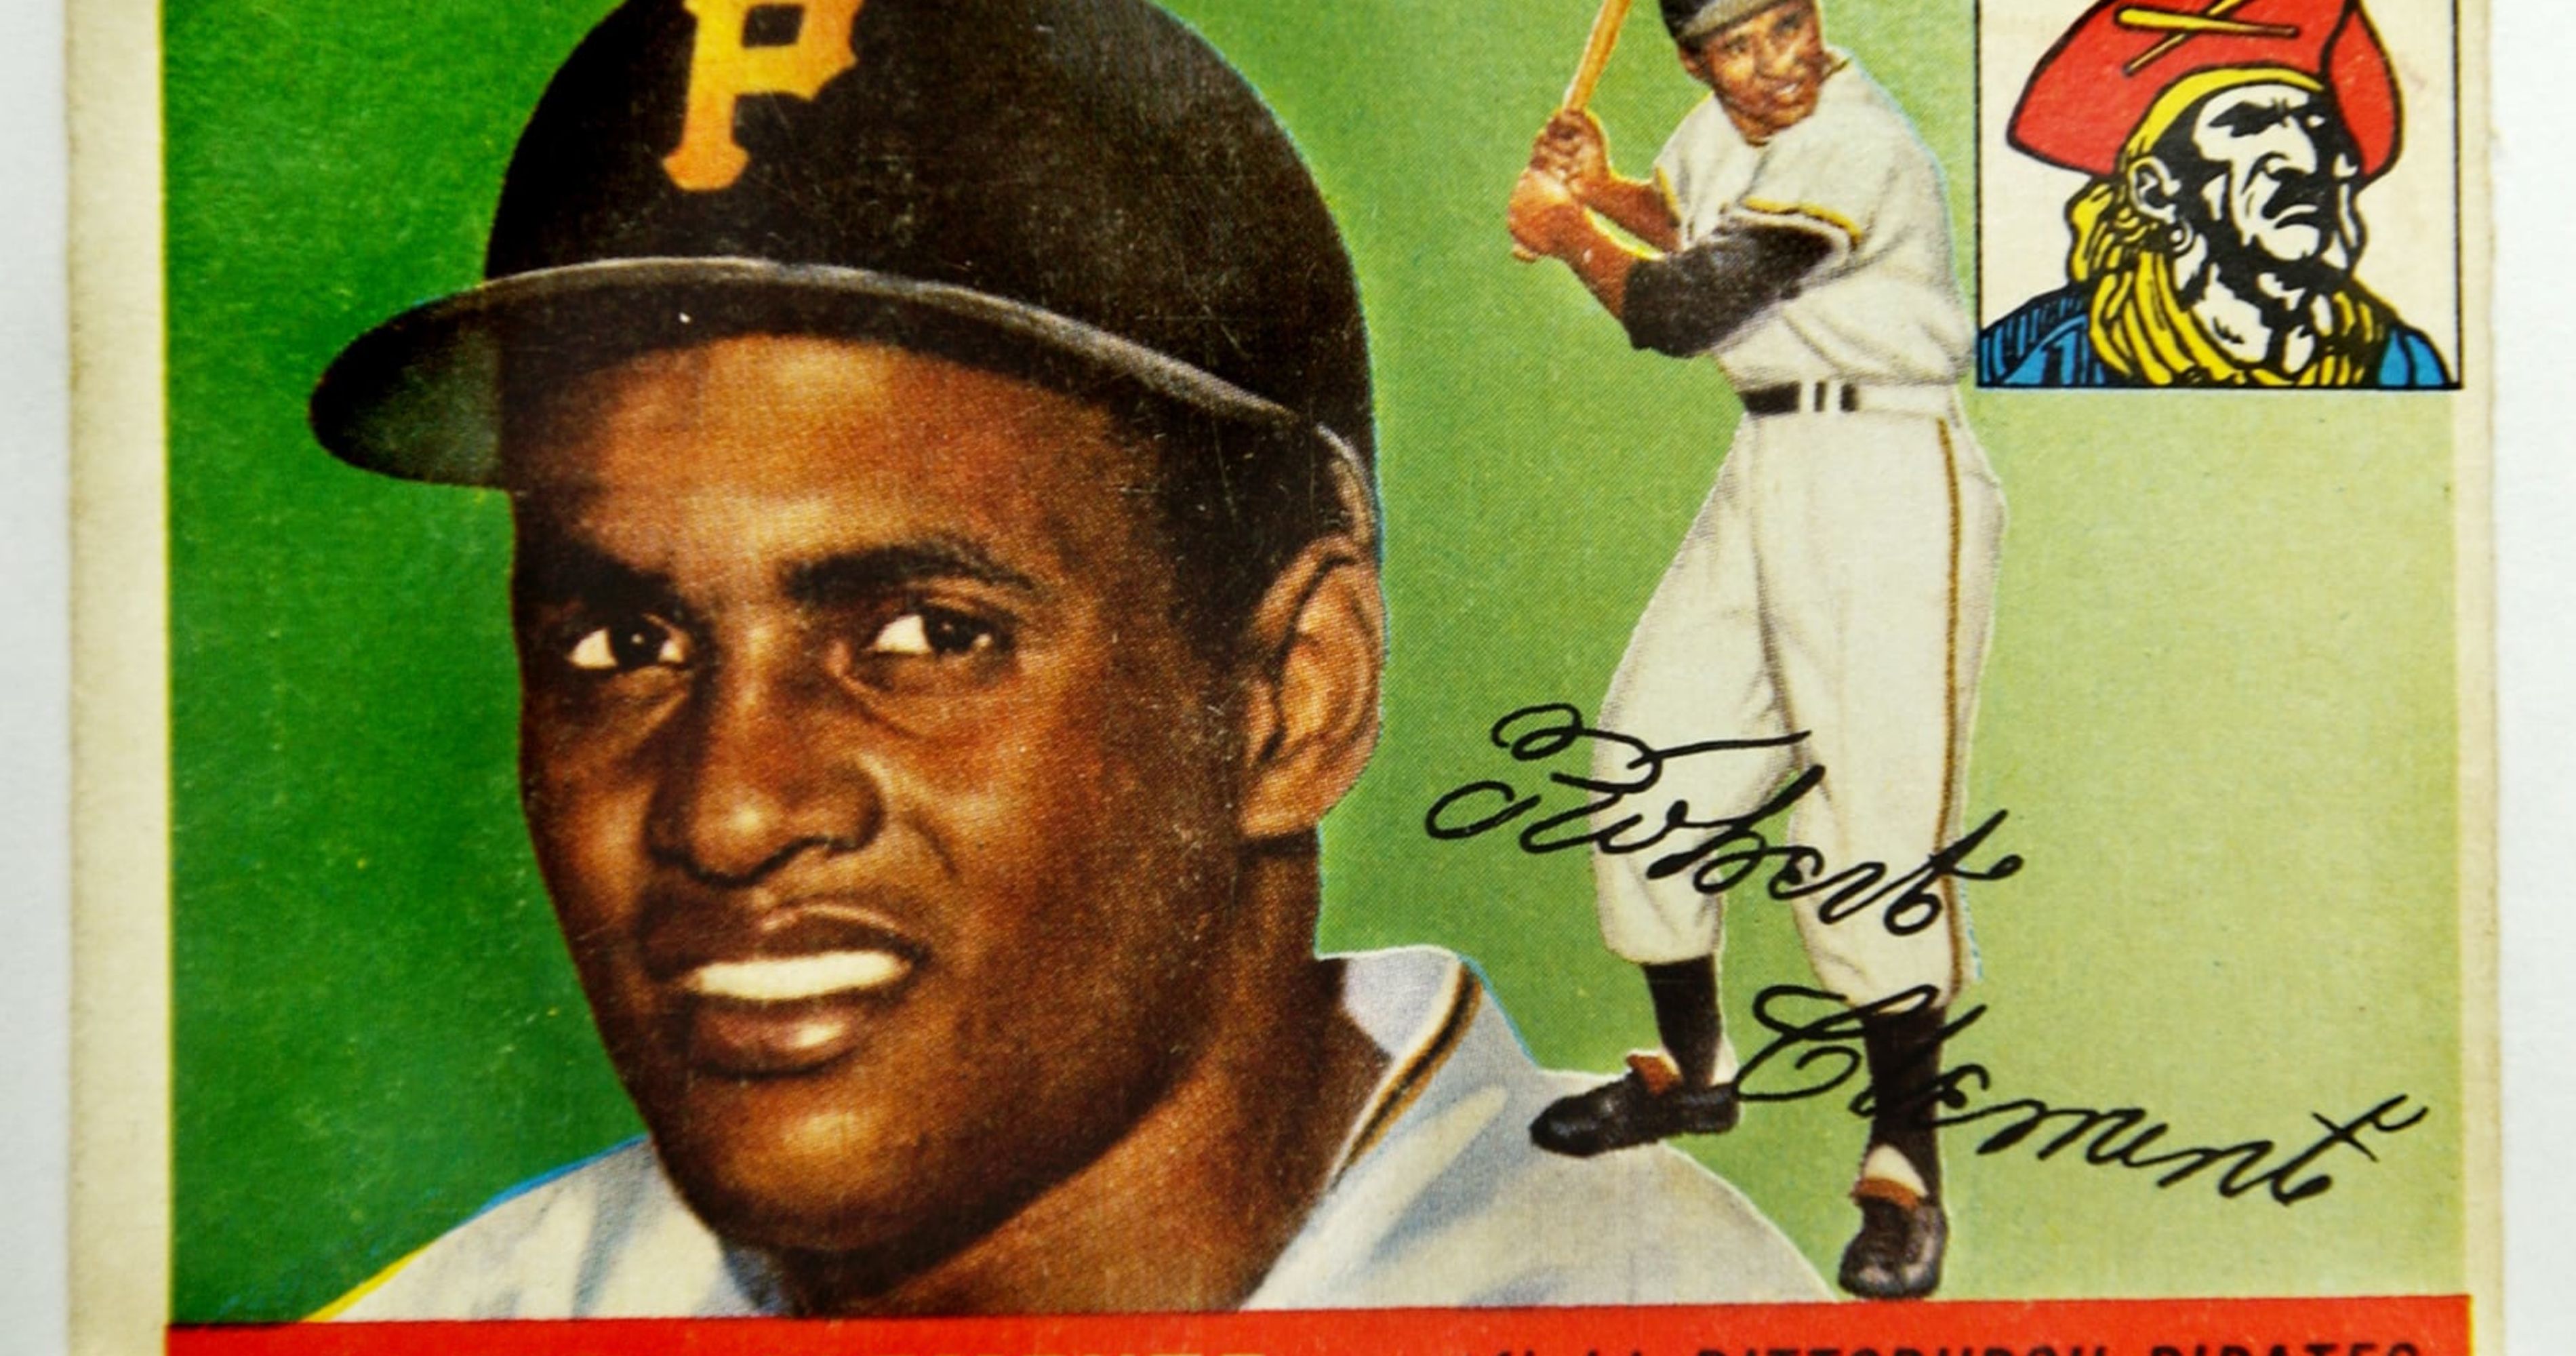 Roberto Clemente 1955 Topps Rookie Card Auctions For Near Record 105m News Scores 